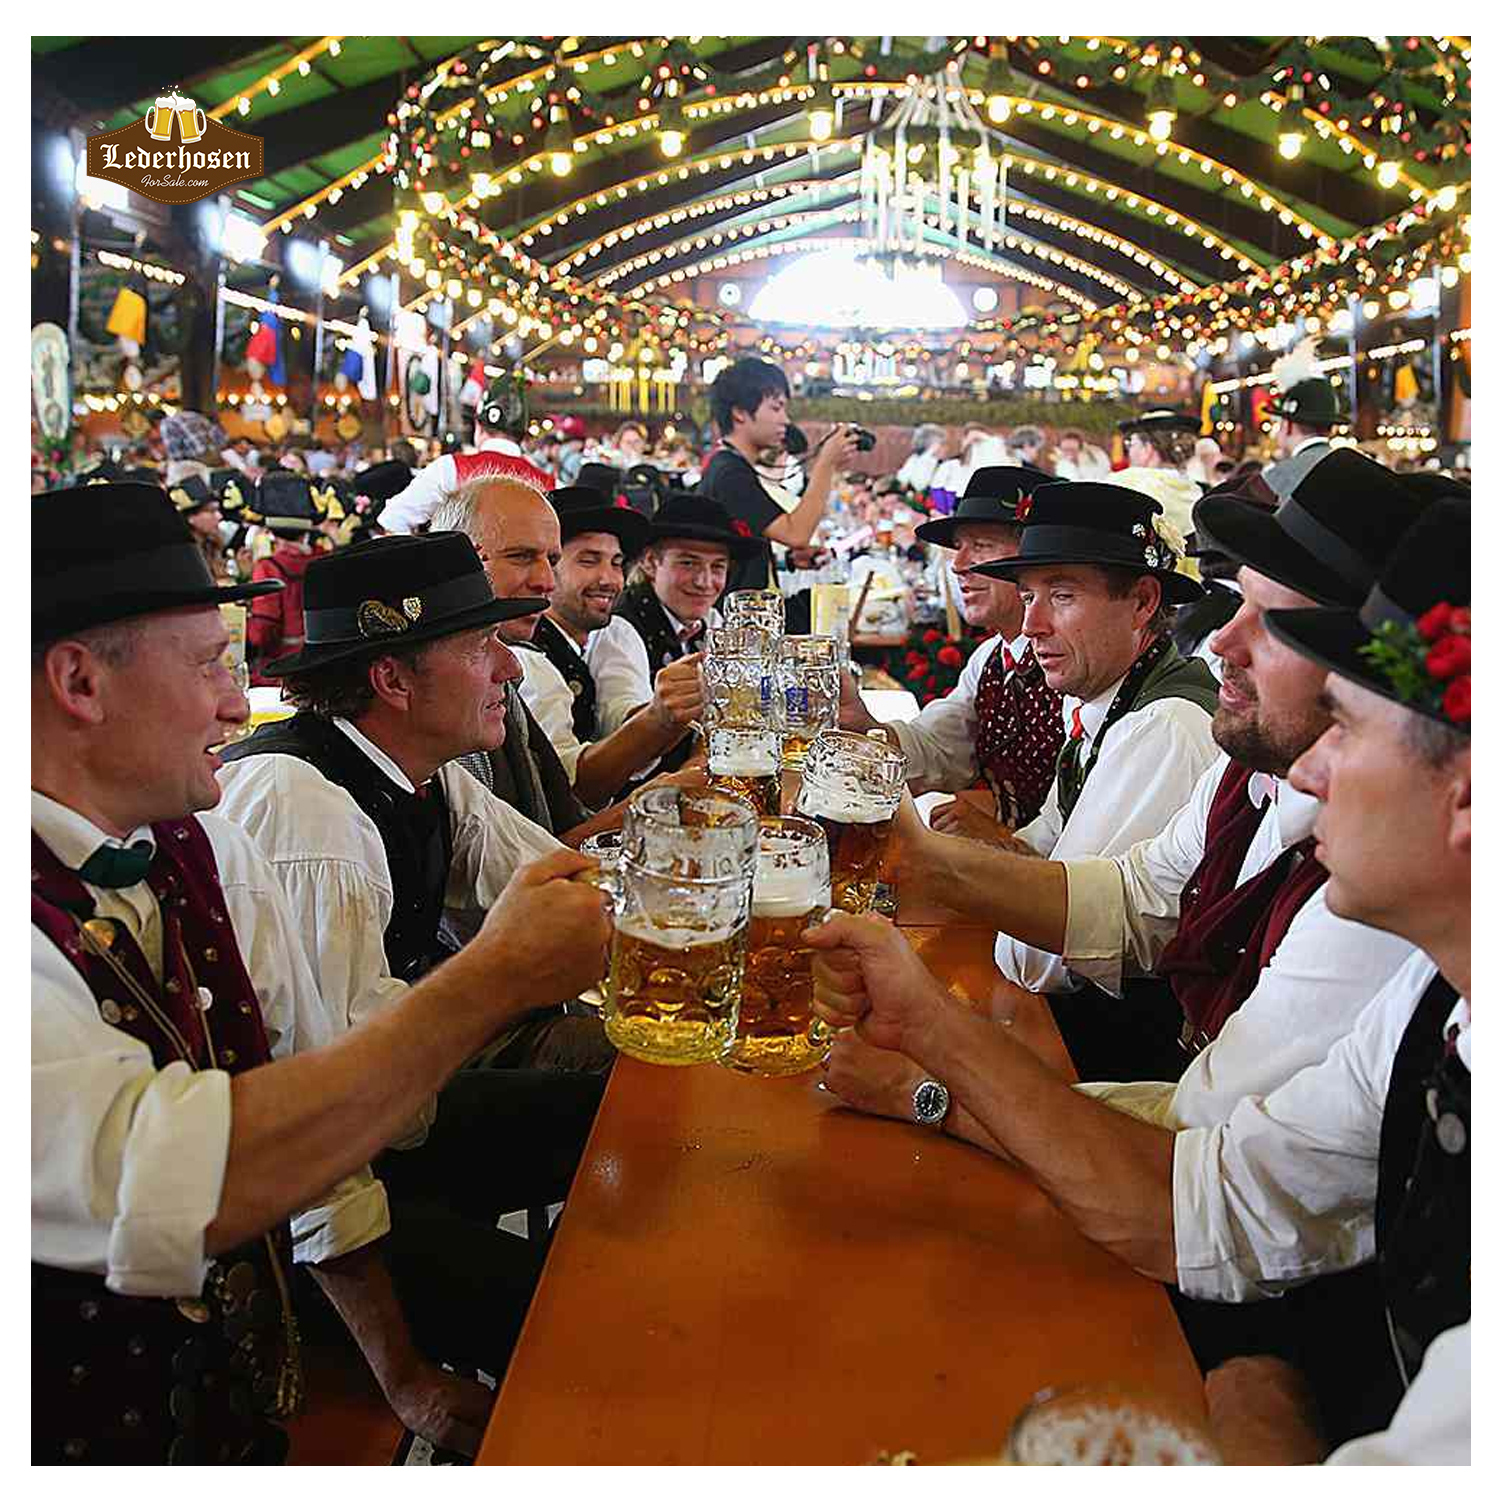 What To Wear To Oktoberfest If You Don't Want To Dress Up